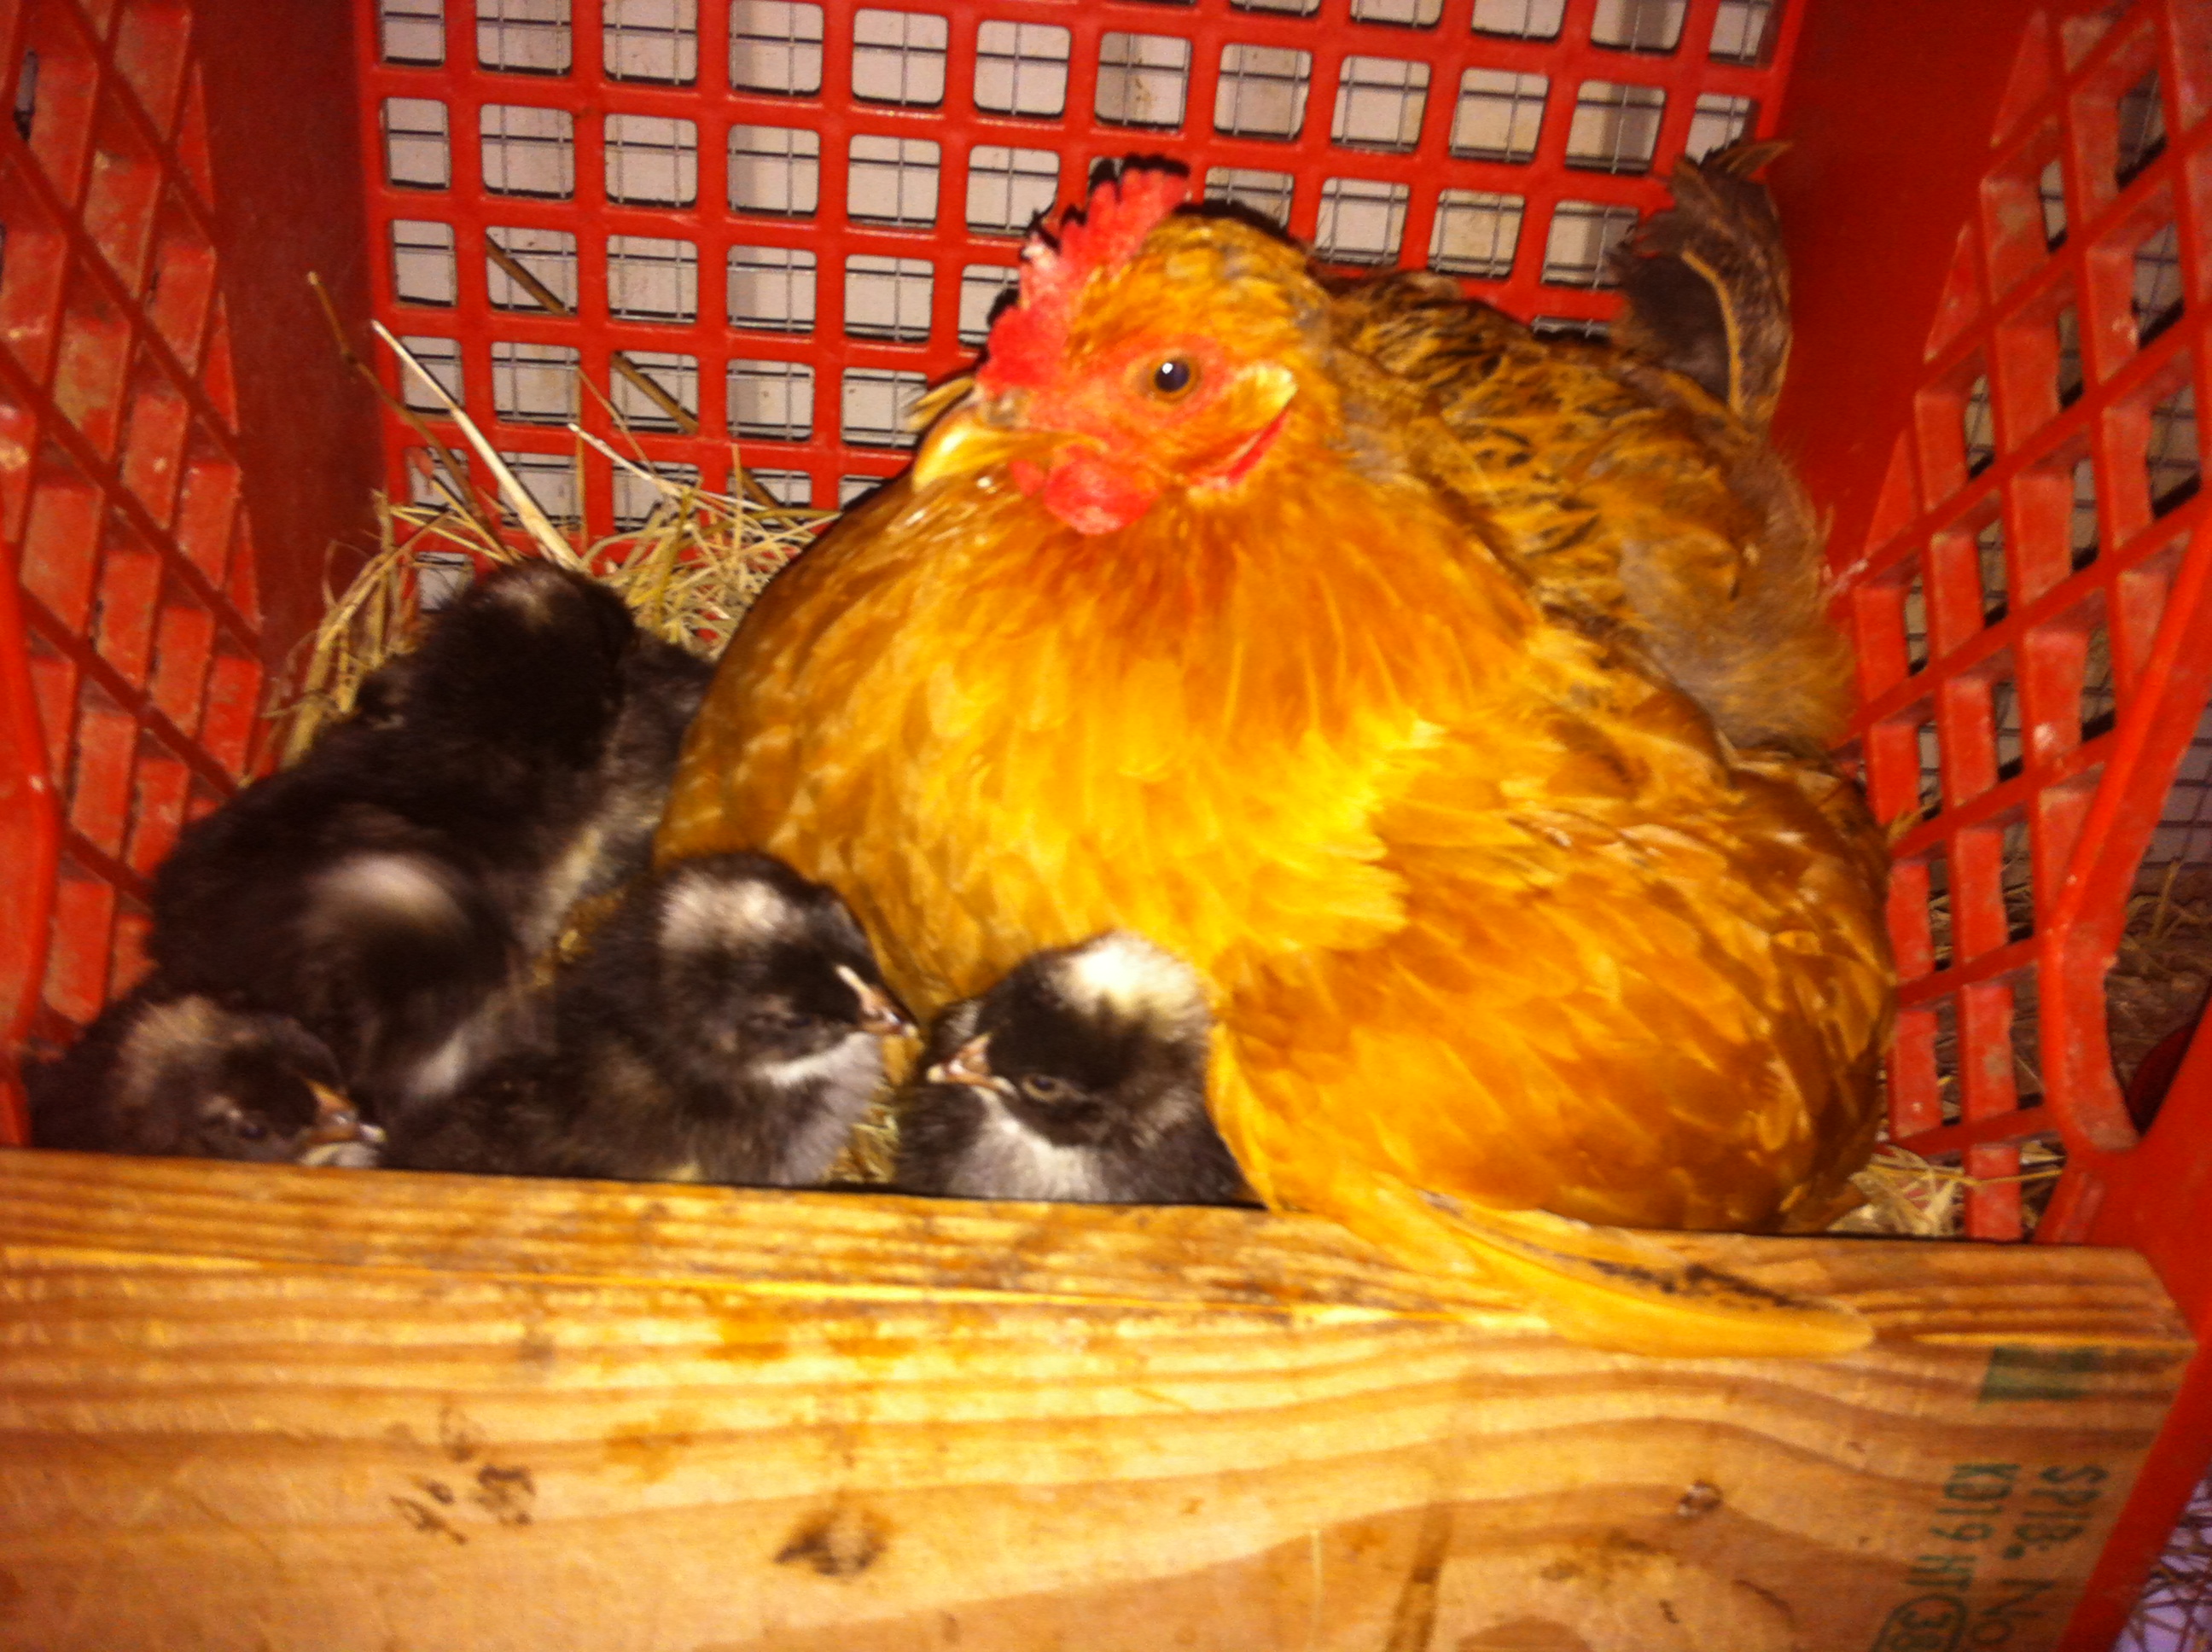 Cuckoo Marans Hatching Under Their Momma! She also accepted some Cuckoos who hatched in an incubator.